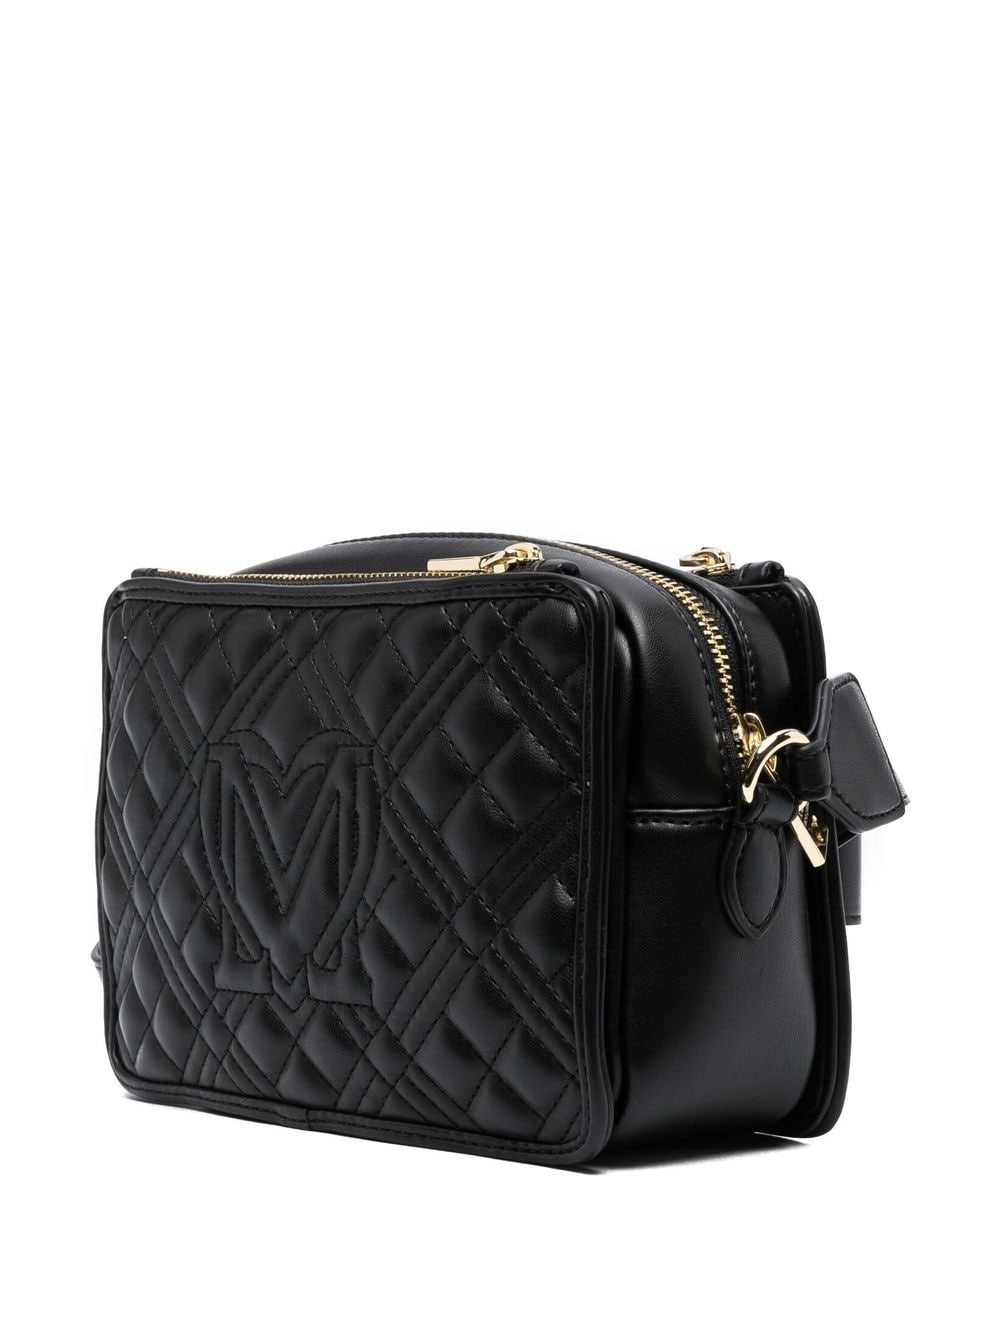 quilted leather bag - 3